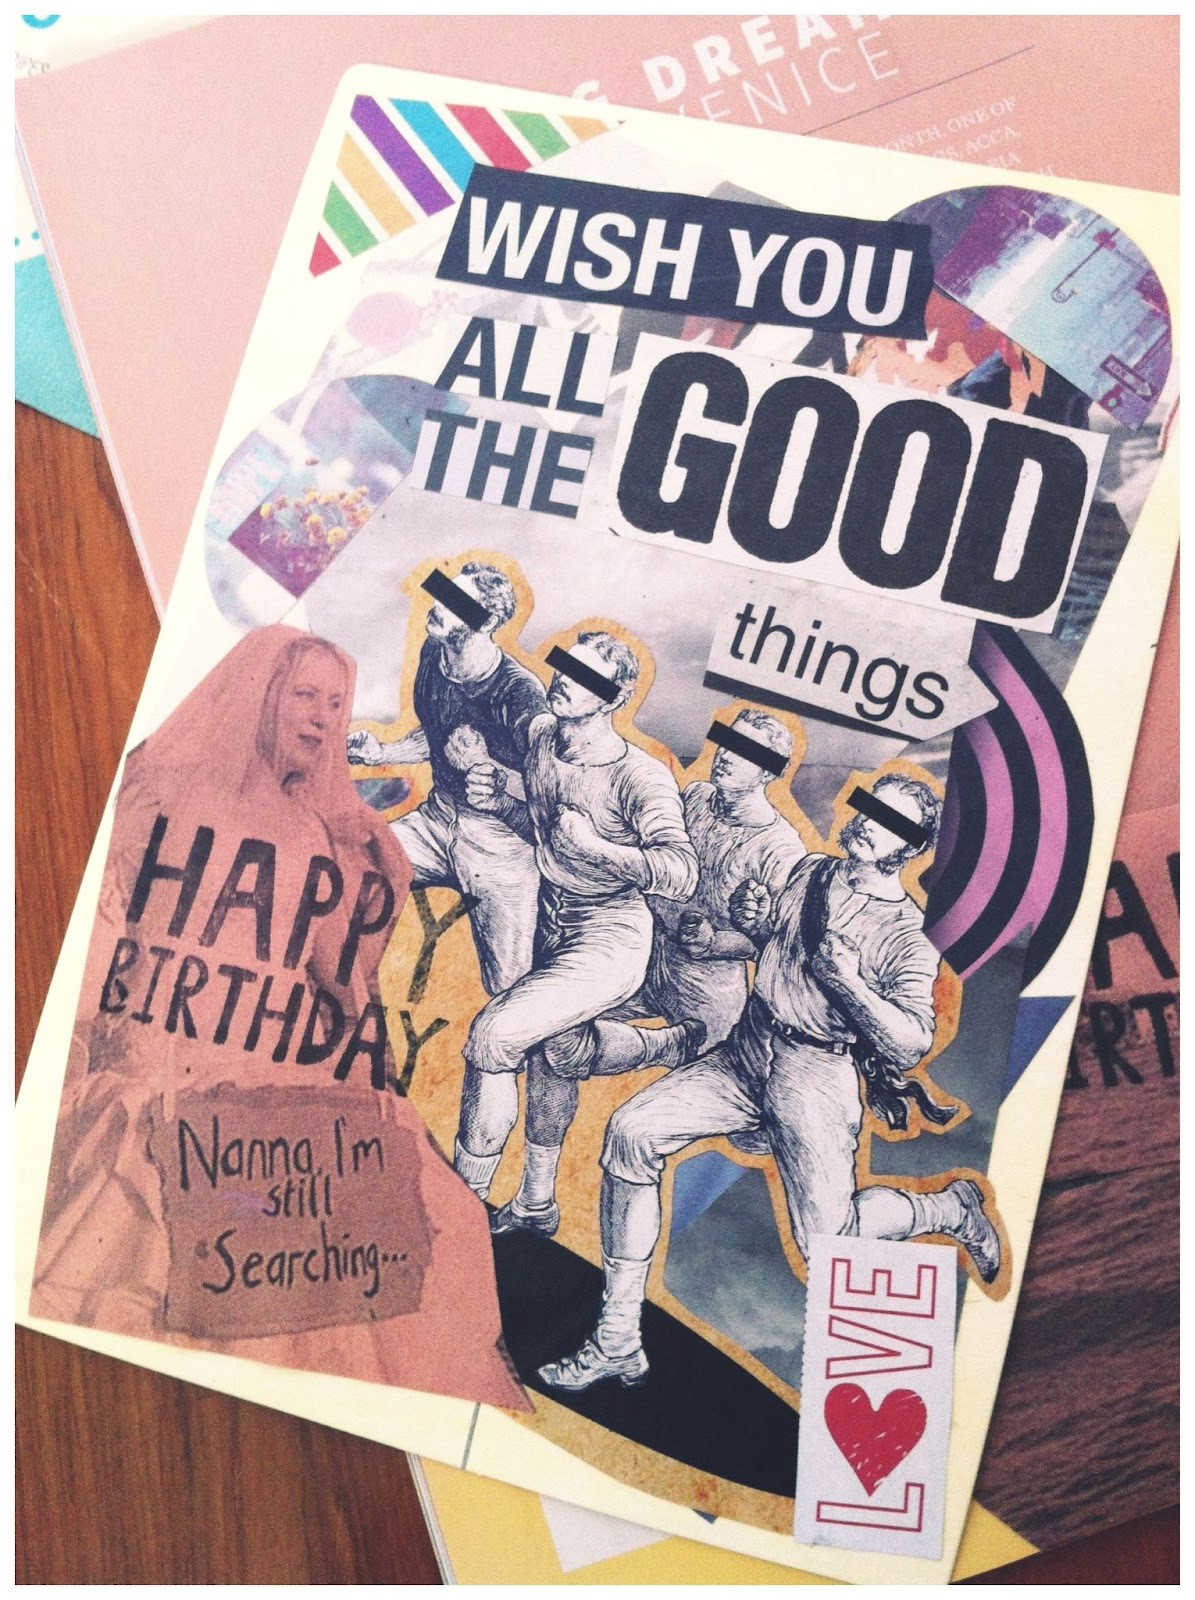 Collage-style birthday card